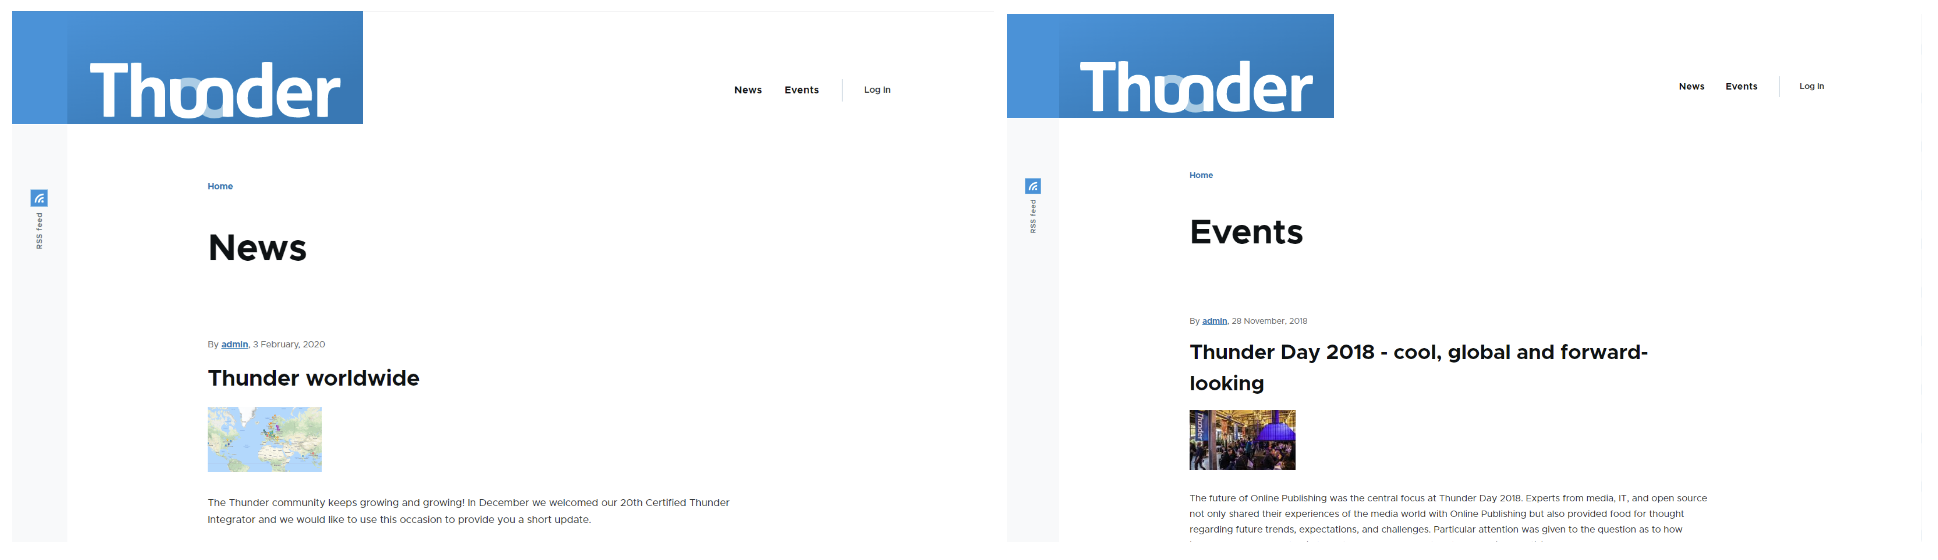 News and Events are our example categories that present different types of content in Thunder CMS. 